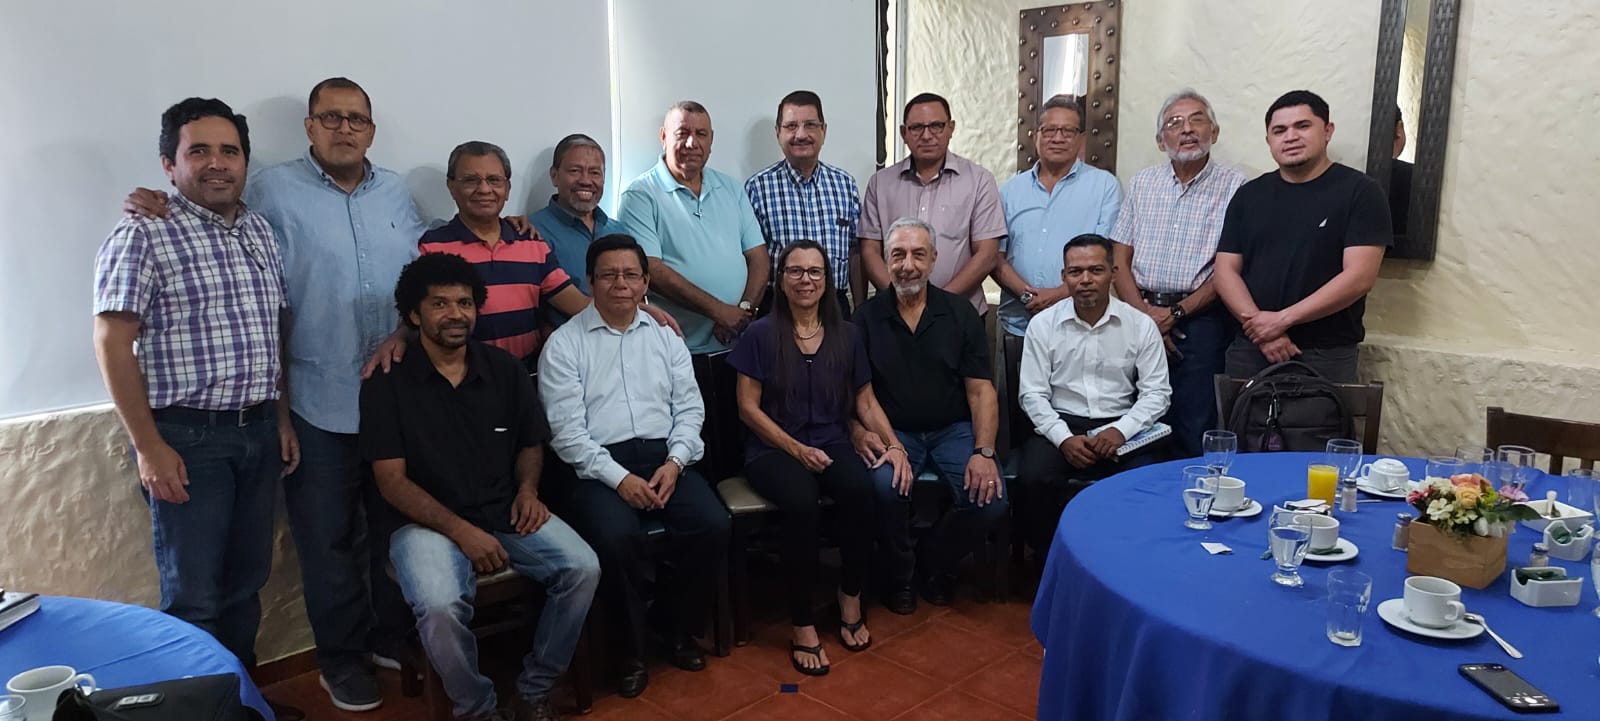 Pastor Leader Group with Cuervo Board. Back Row: From Left Jose Elias - Board President, Roberto Choto - Board Member, Pastor Gabriel Aguilar - Board Secretary; Back Row 3rd from Right Pastor Jorge Burgos - Board Member, 2nd from right Pastor Enrique Martinez - Board Member